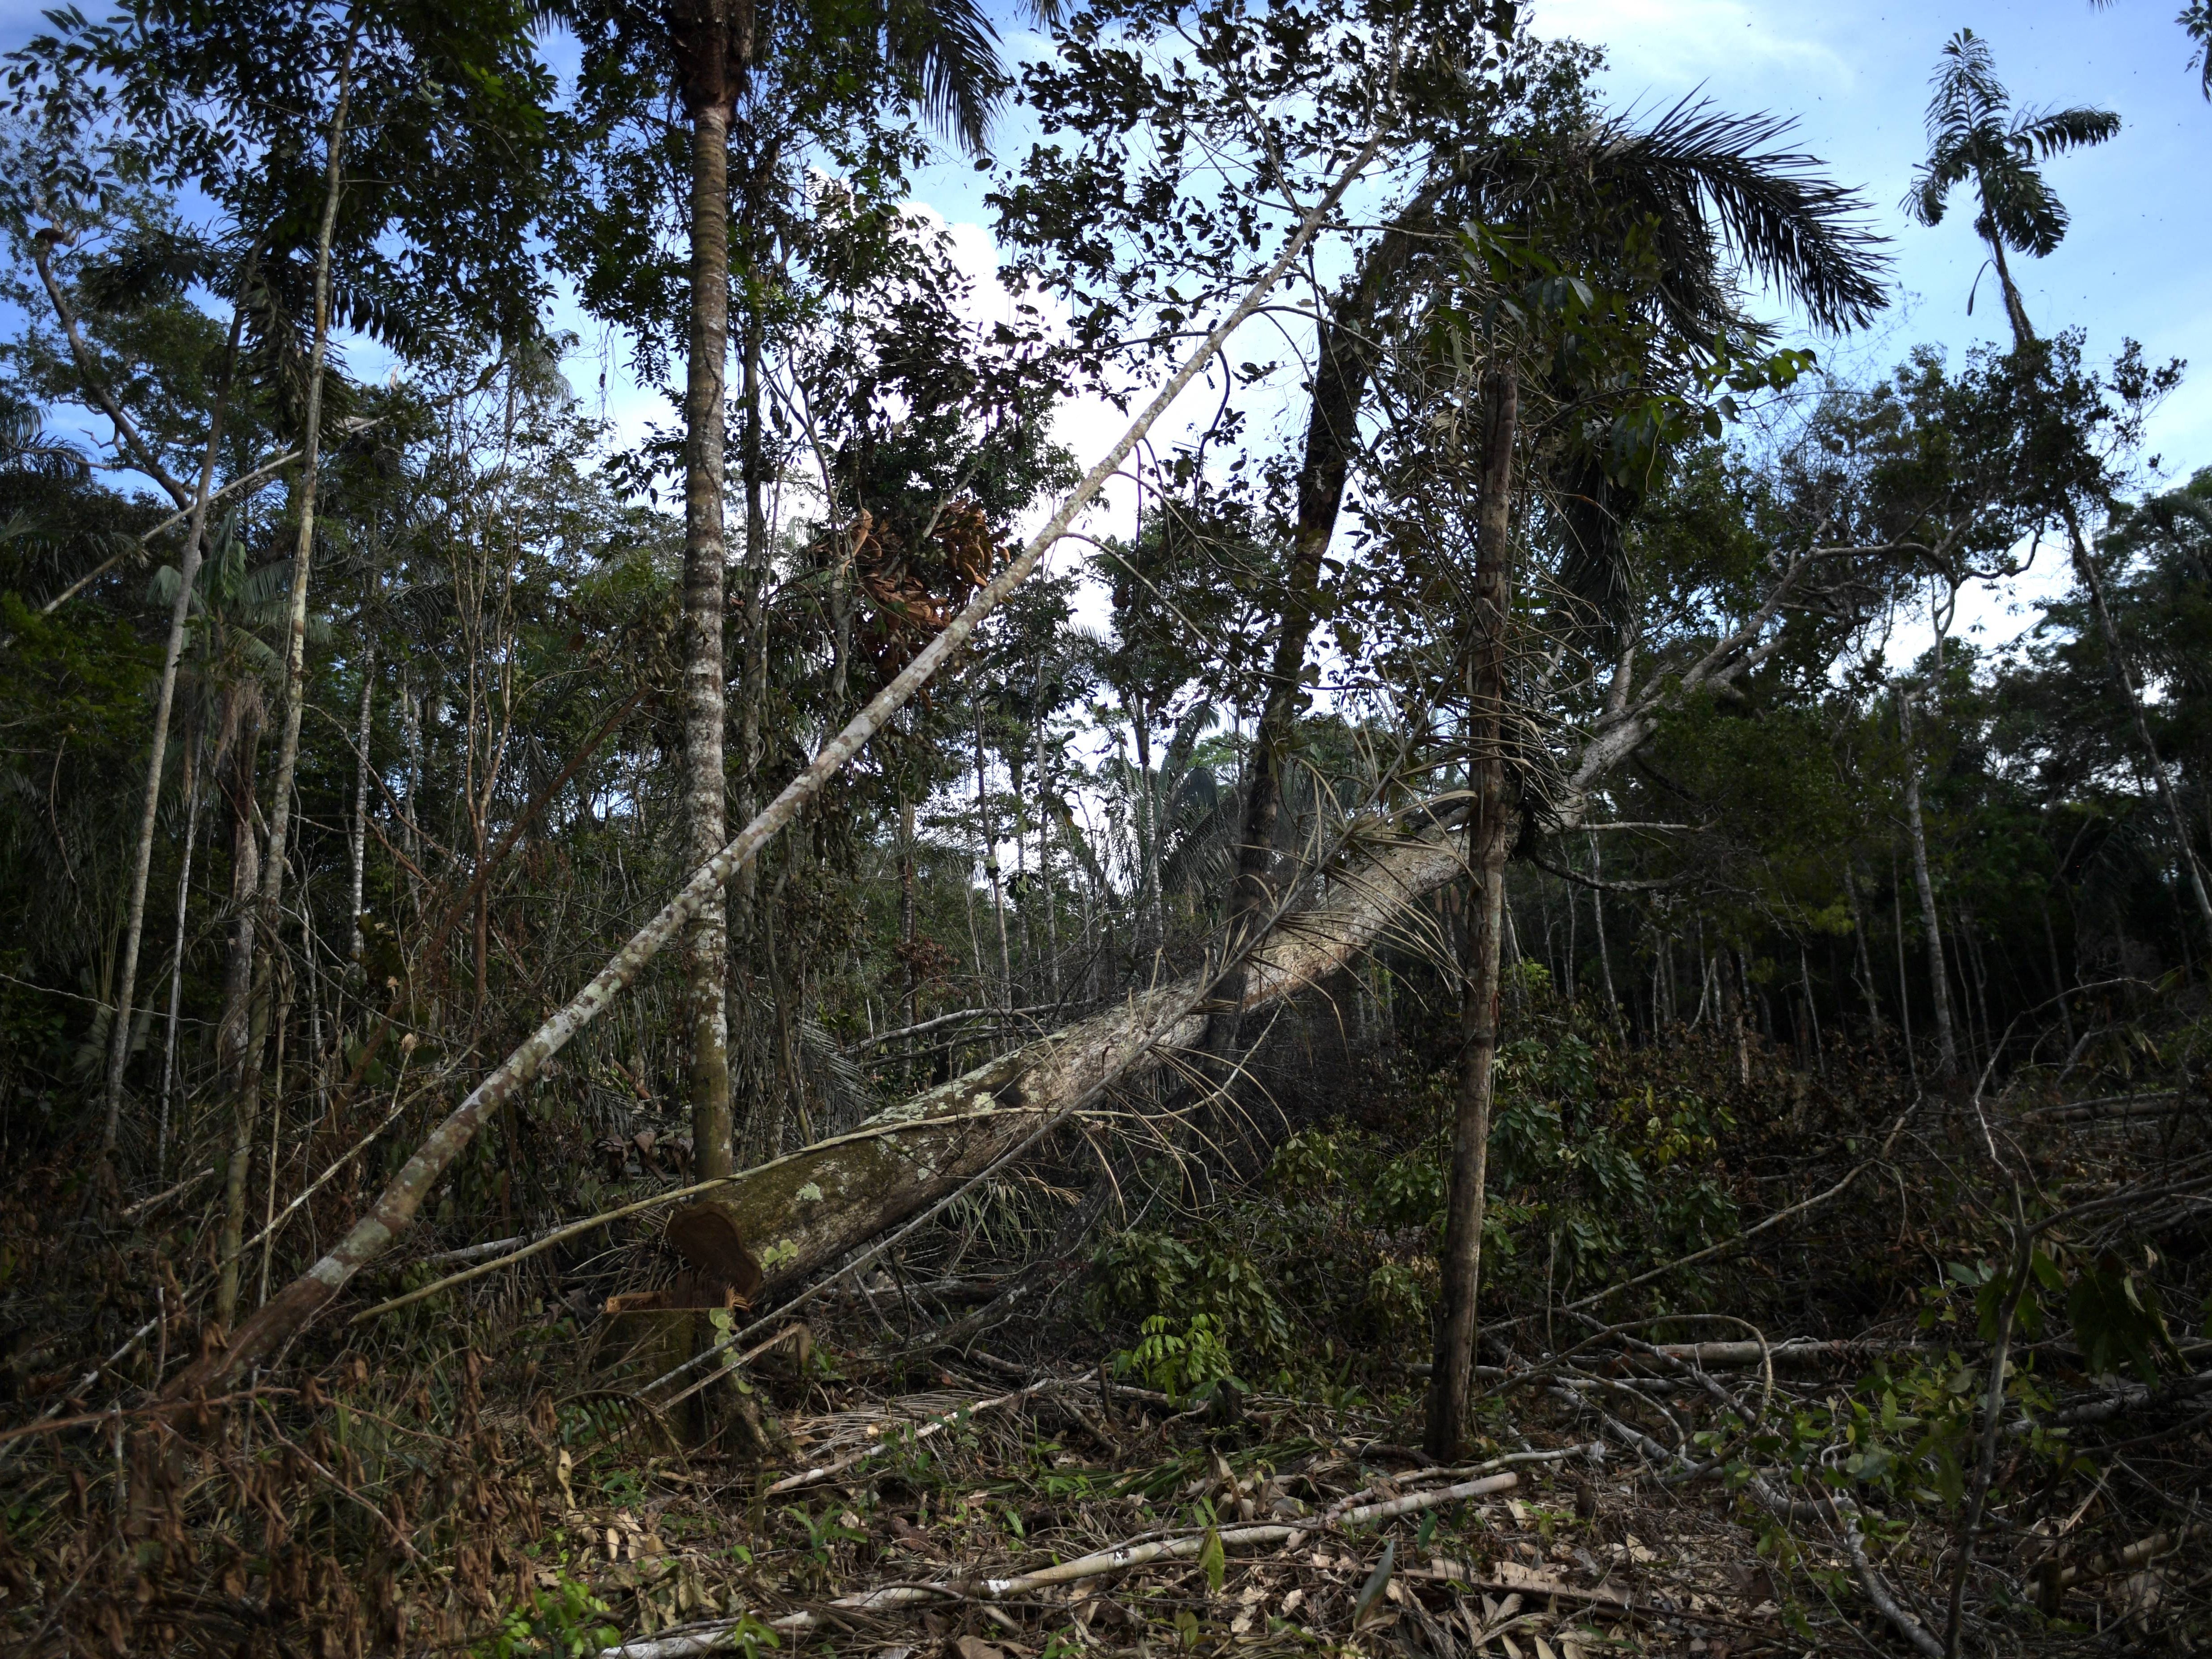 World leaders promised to halt deforestation by 2030 at last year’s Cop26 summit